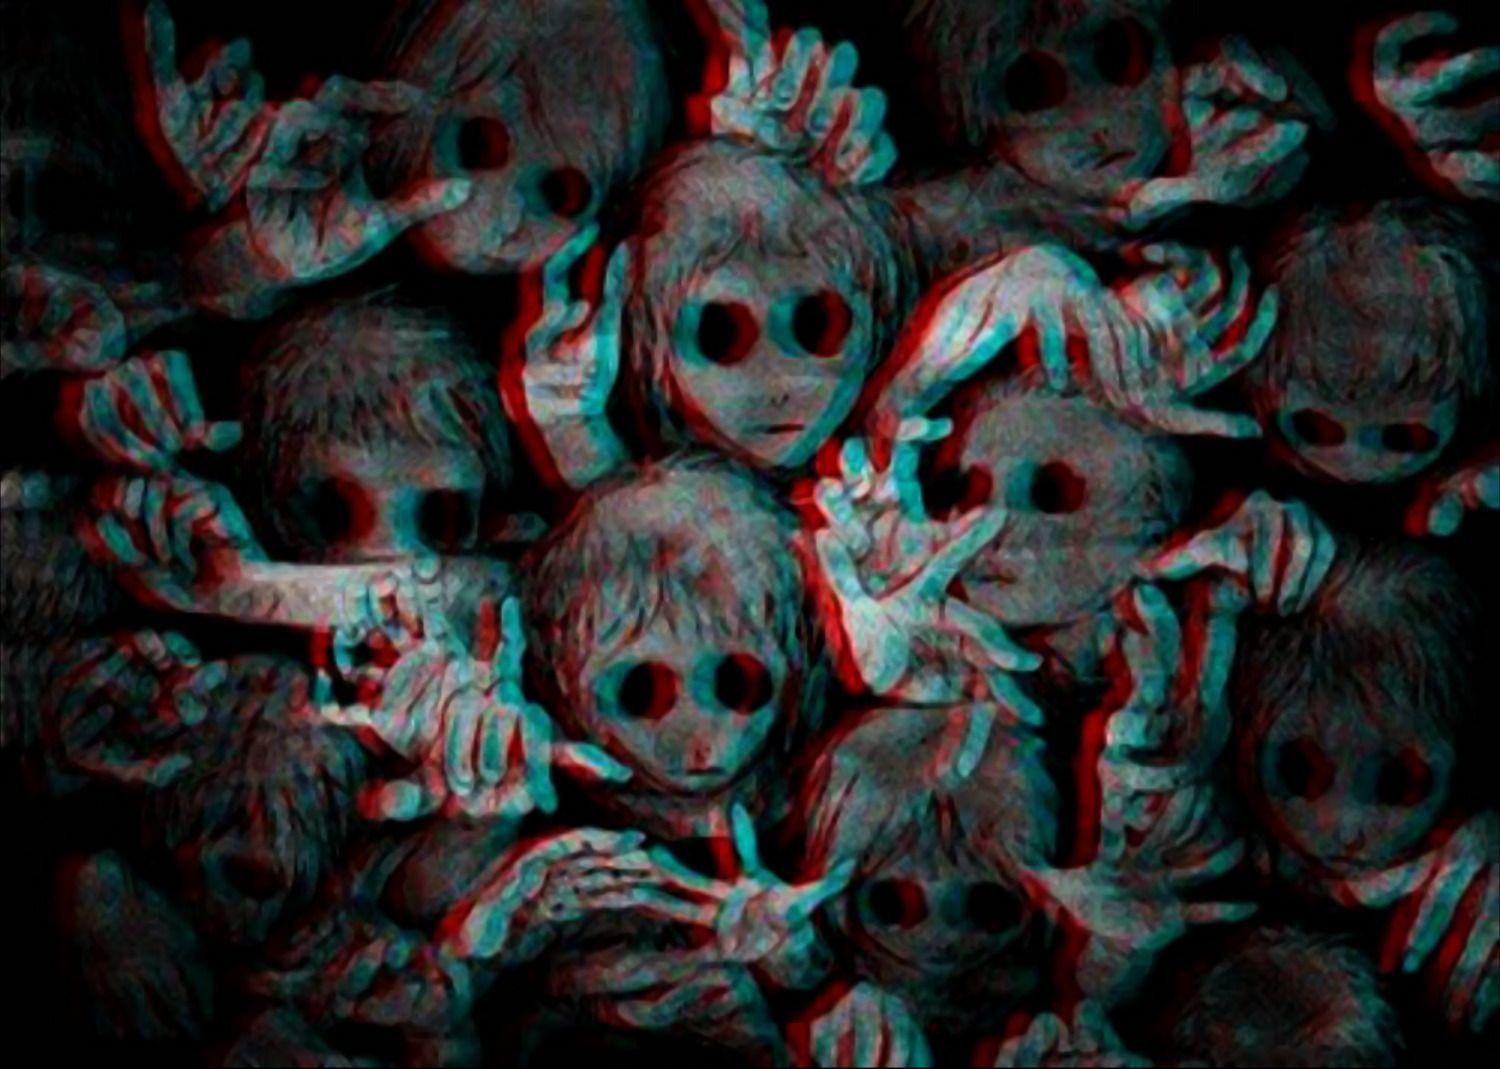 Creepy Wallpaper Collection. Scary wallpaper, Dark wallpaper iphone, Creepy background